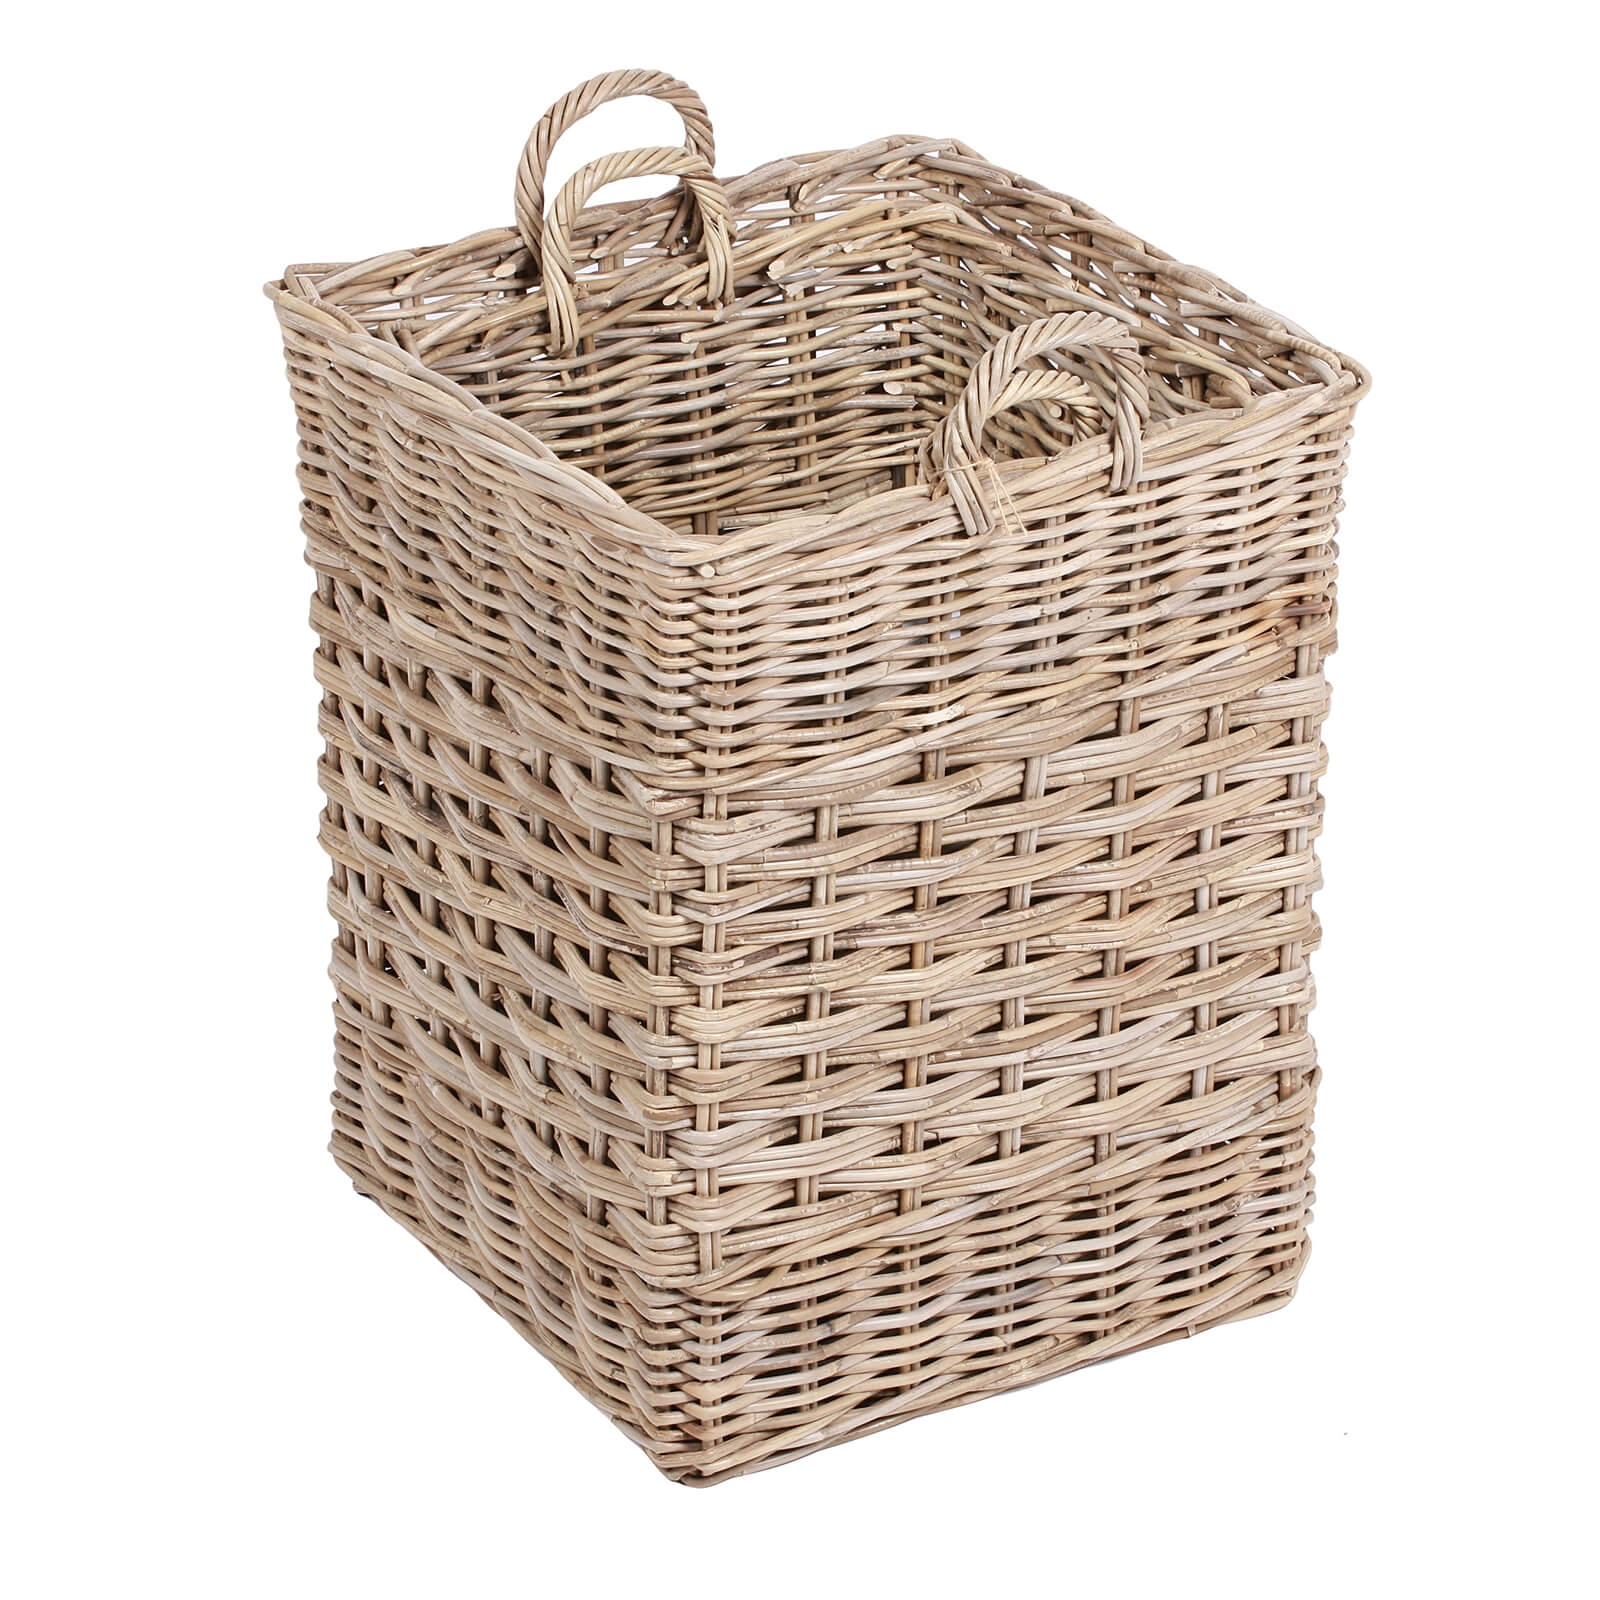 Set of 2 Wicker Square Baskets